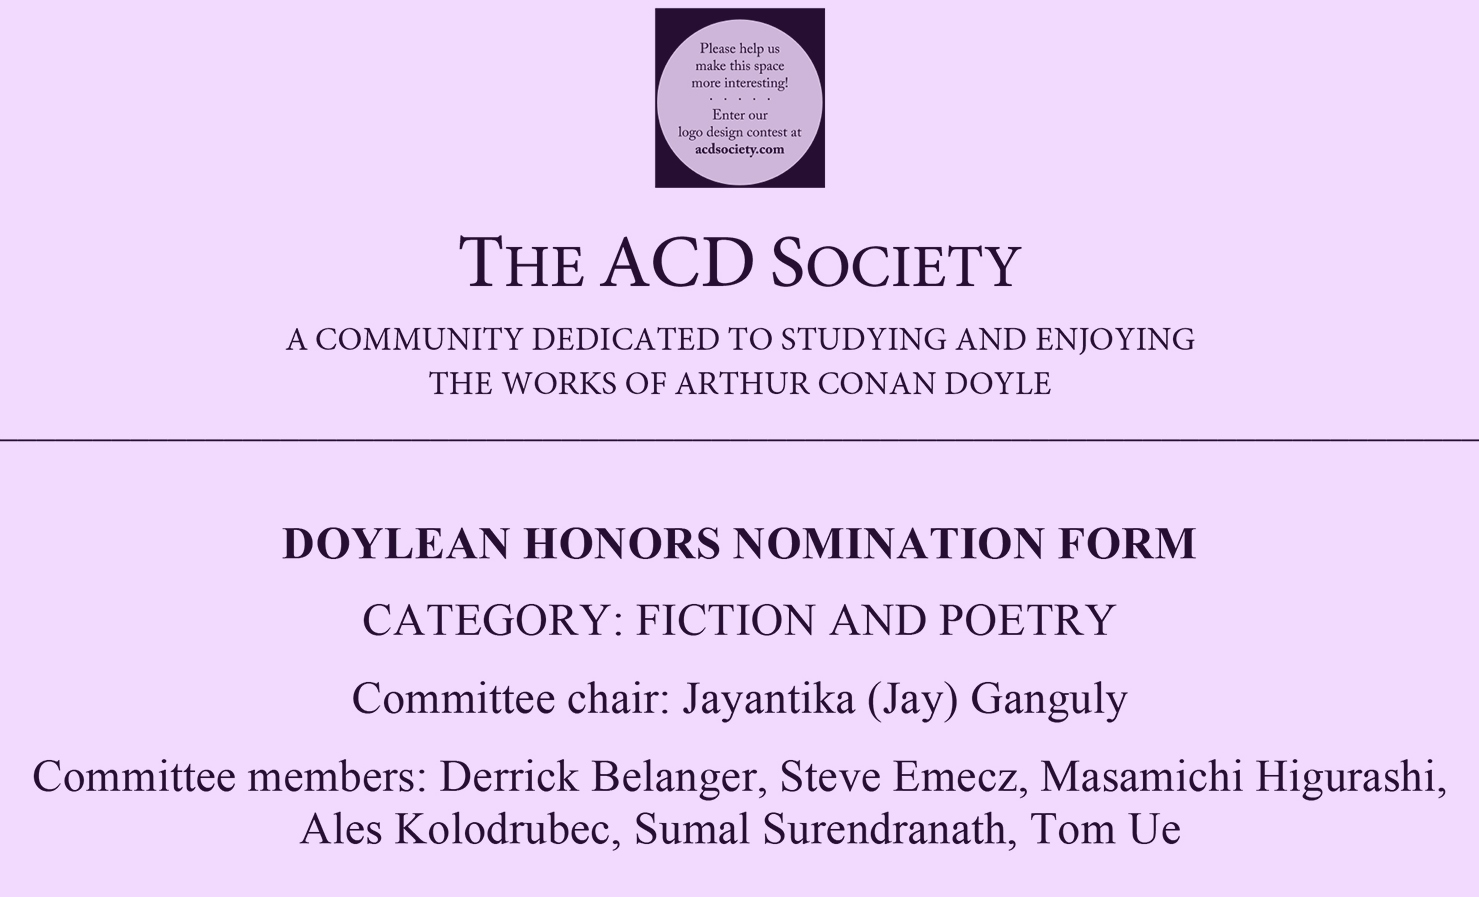 excerpt from Doylean Honors nomination form in the Fictoin and Poetry category